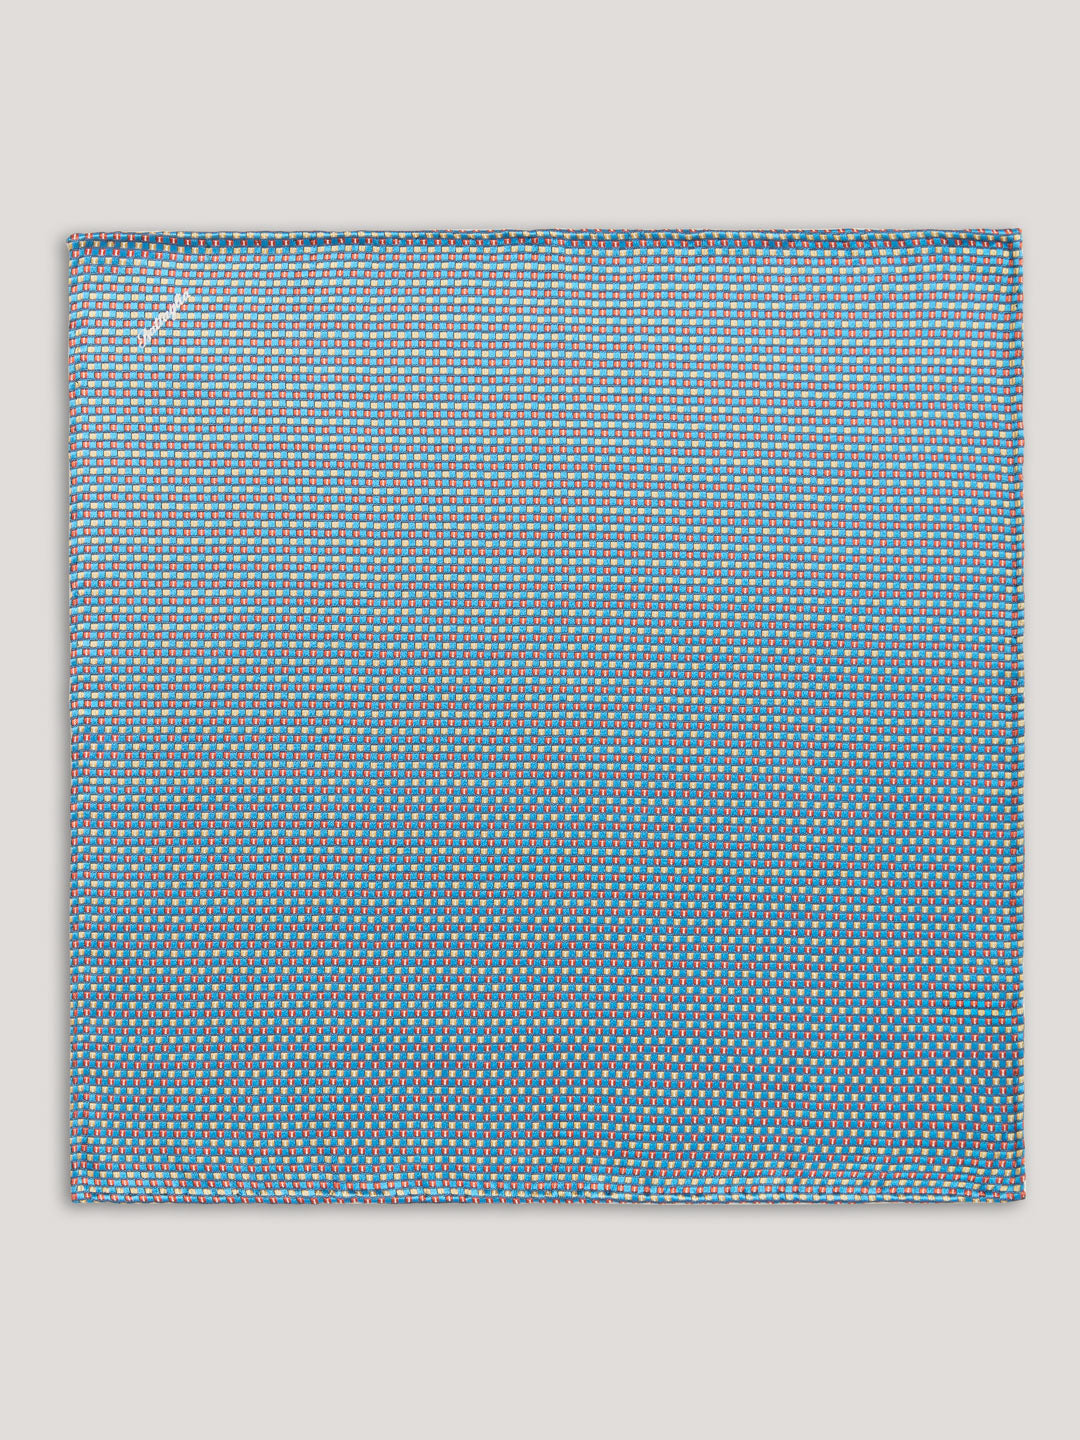 Blue handkerchief with small pattern design. 